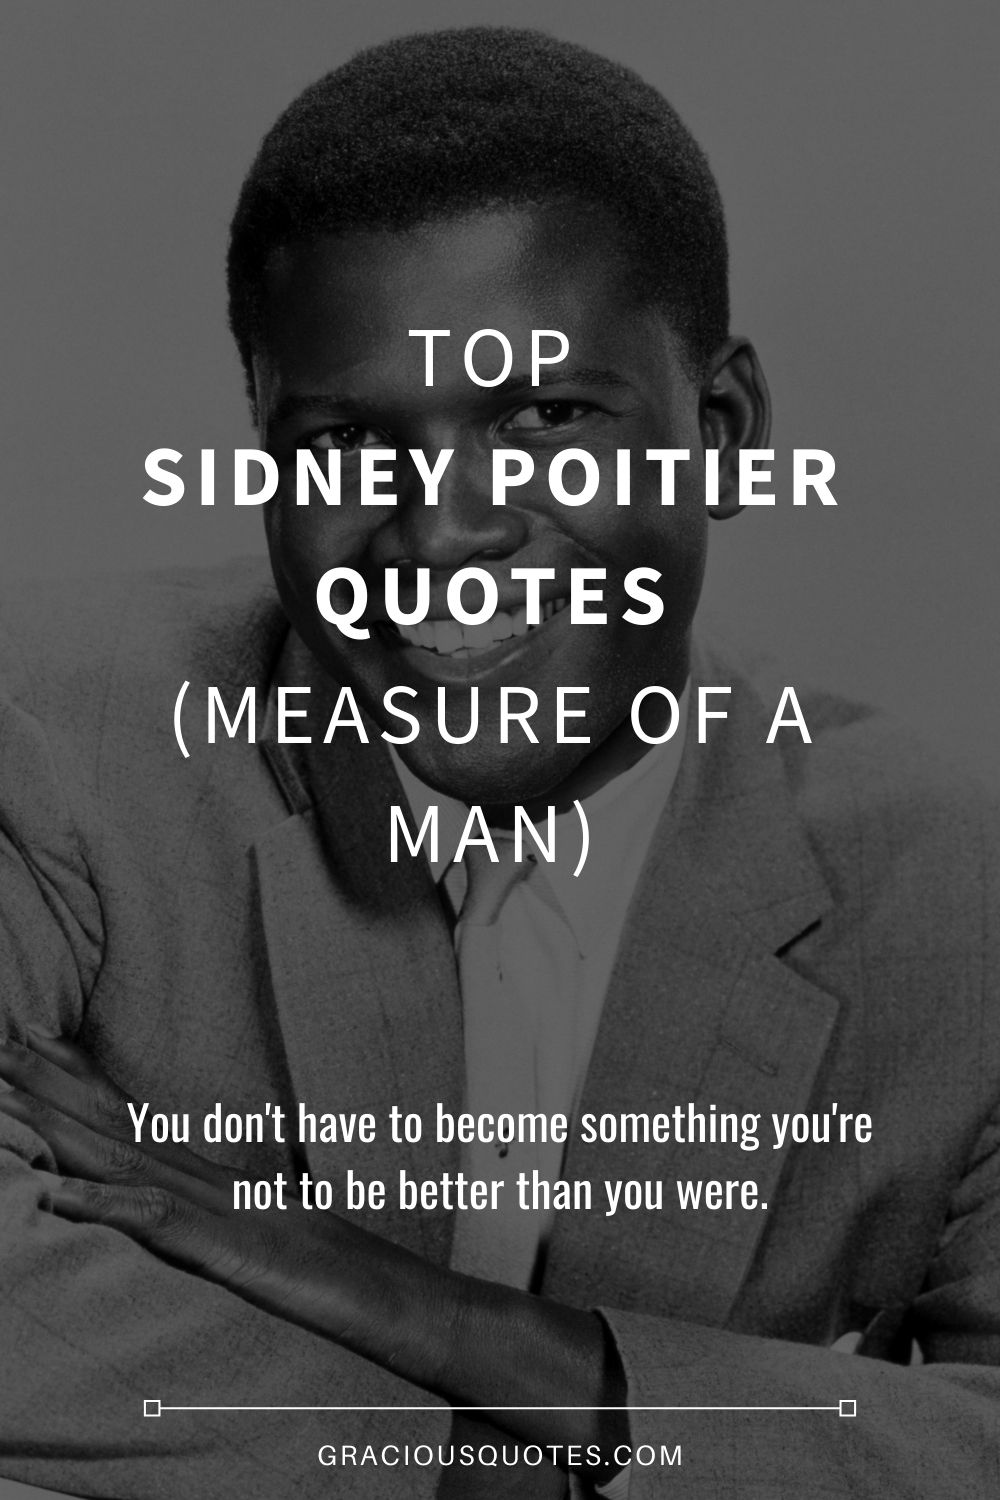 Top Sidney Poitier Quotes (MEASURE OF A MAN) - Gracious Quotes